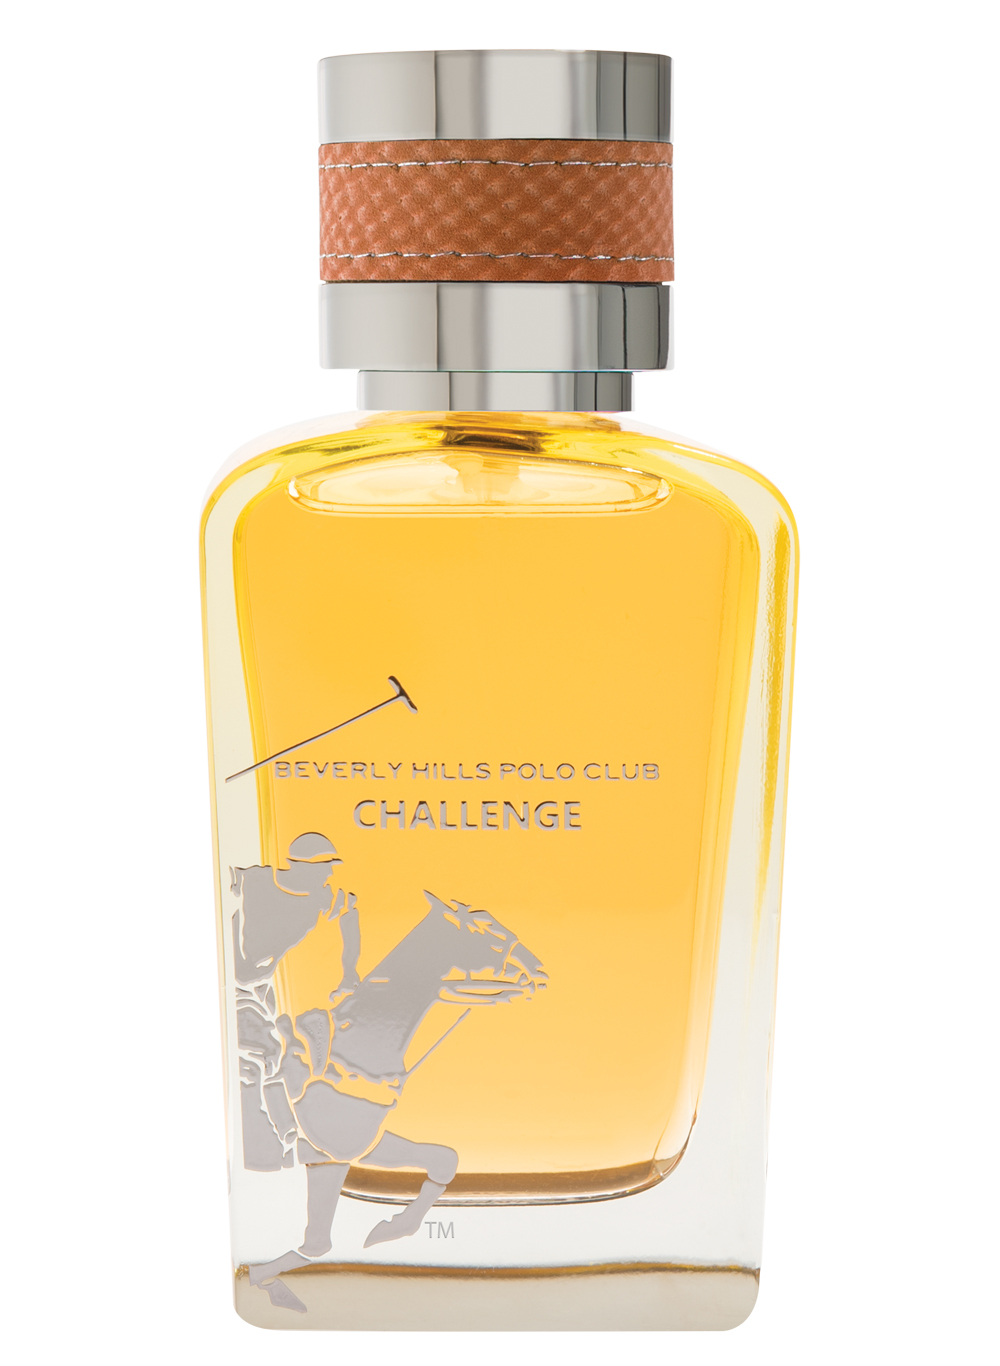 Challenge Beverly Hills Polo Club perfume - a fragrance for women 2018